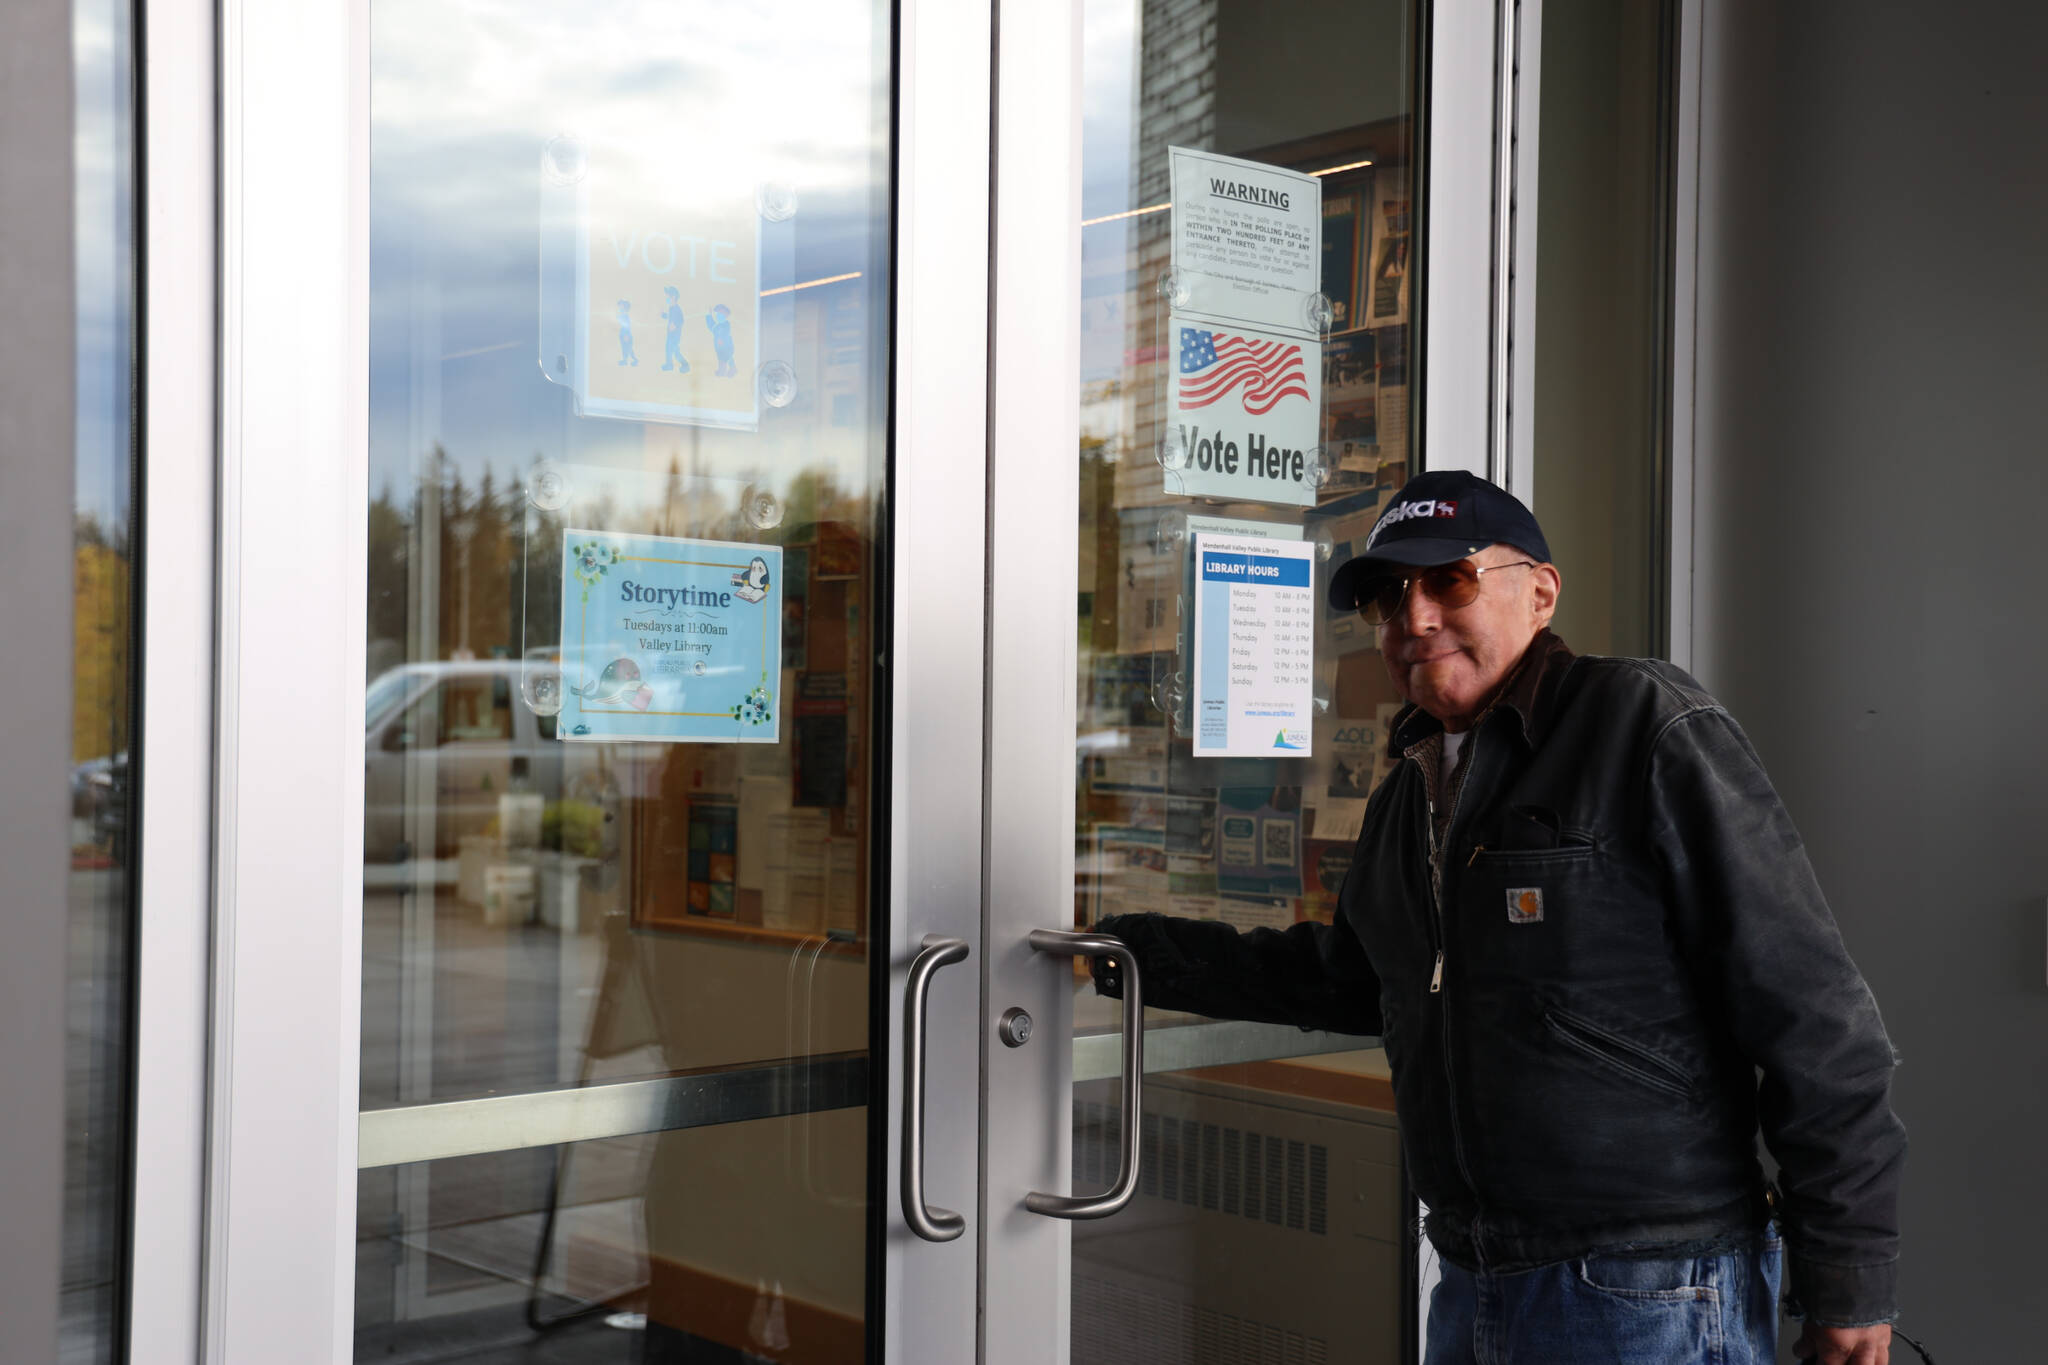 Clarise Larson / Juneau Empire 
Larry Silverly opens the door at the voter center located at the Mendenhall Valley Public Library to cast his vote on Tuesday afternoon.